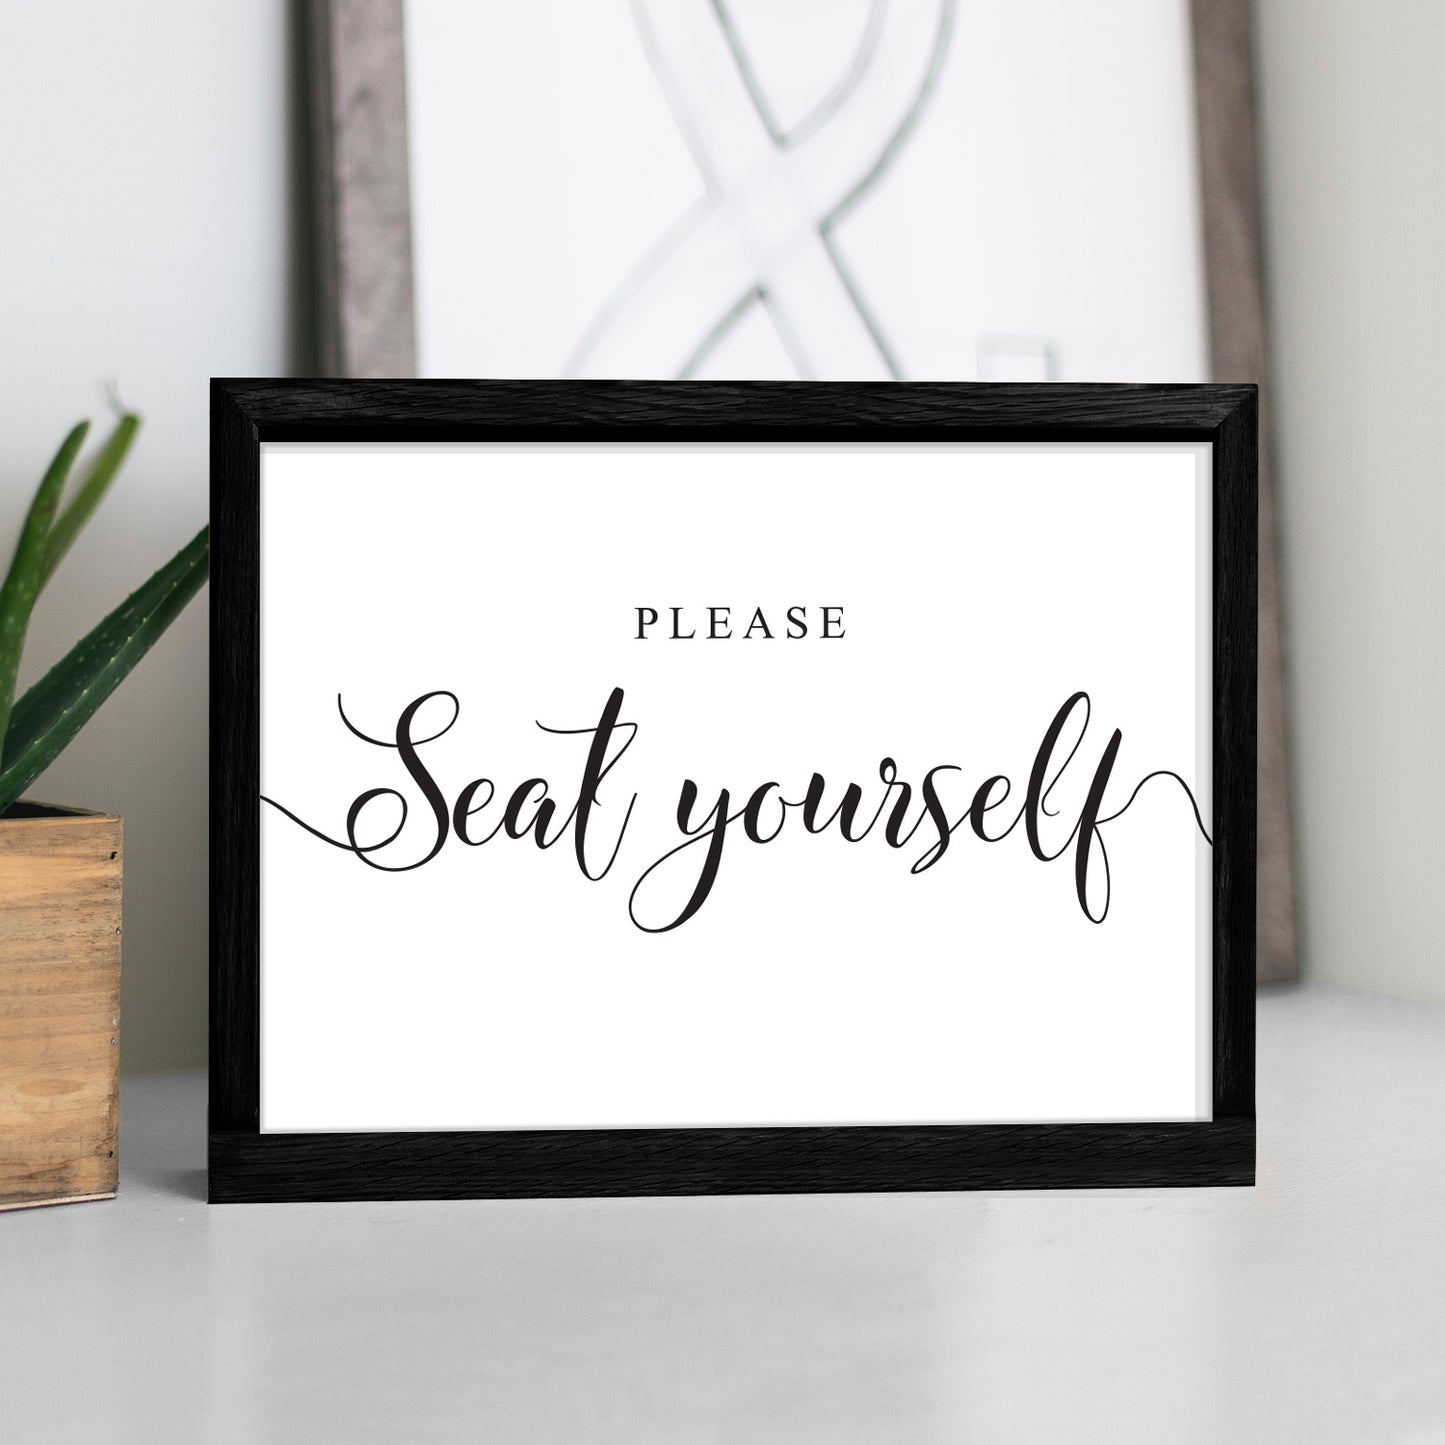 Sit where you like wedding sign download